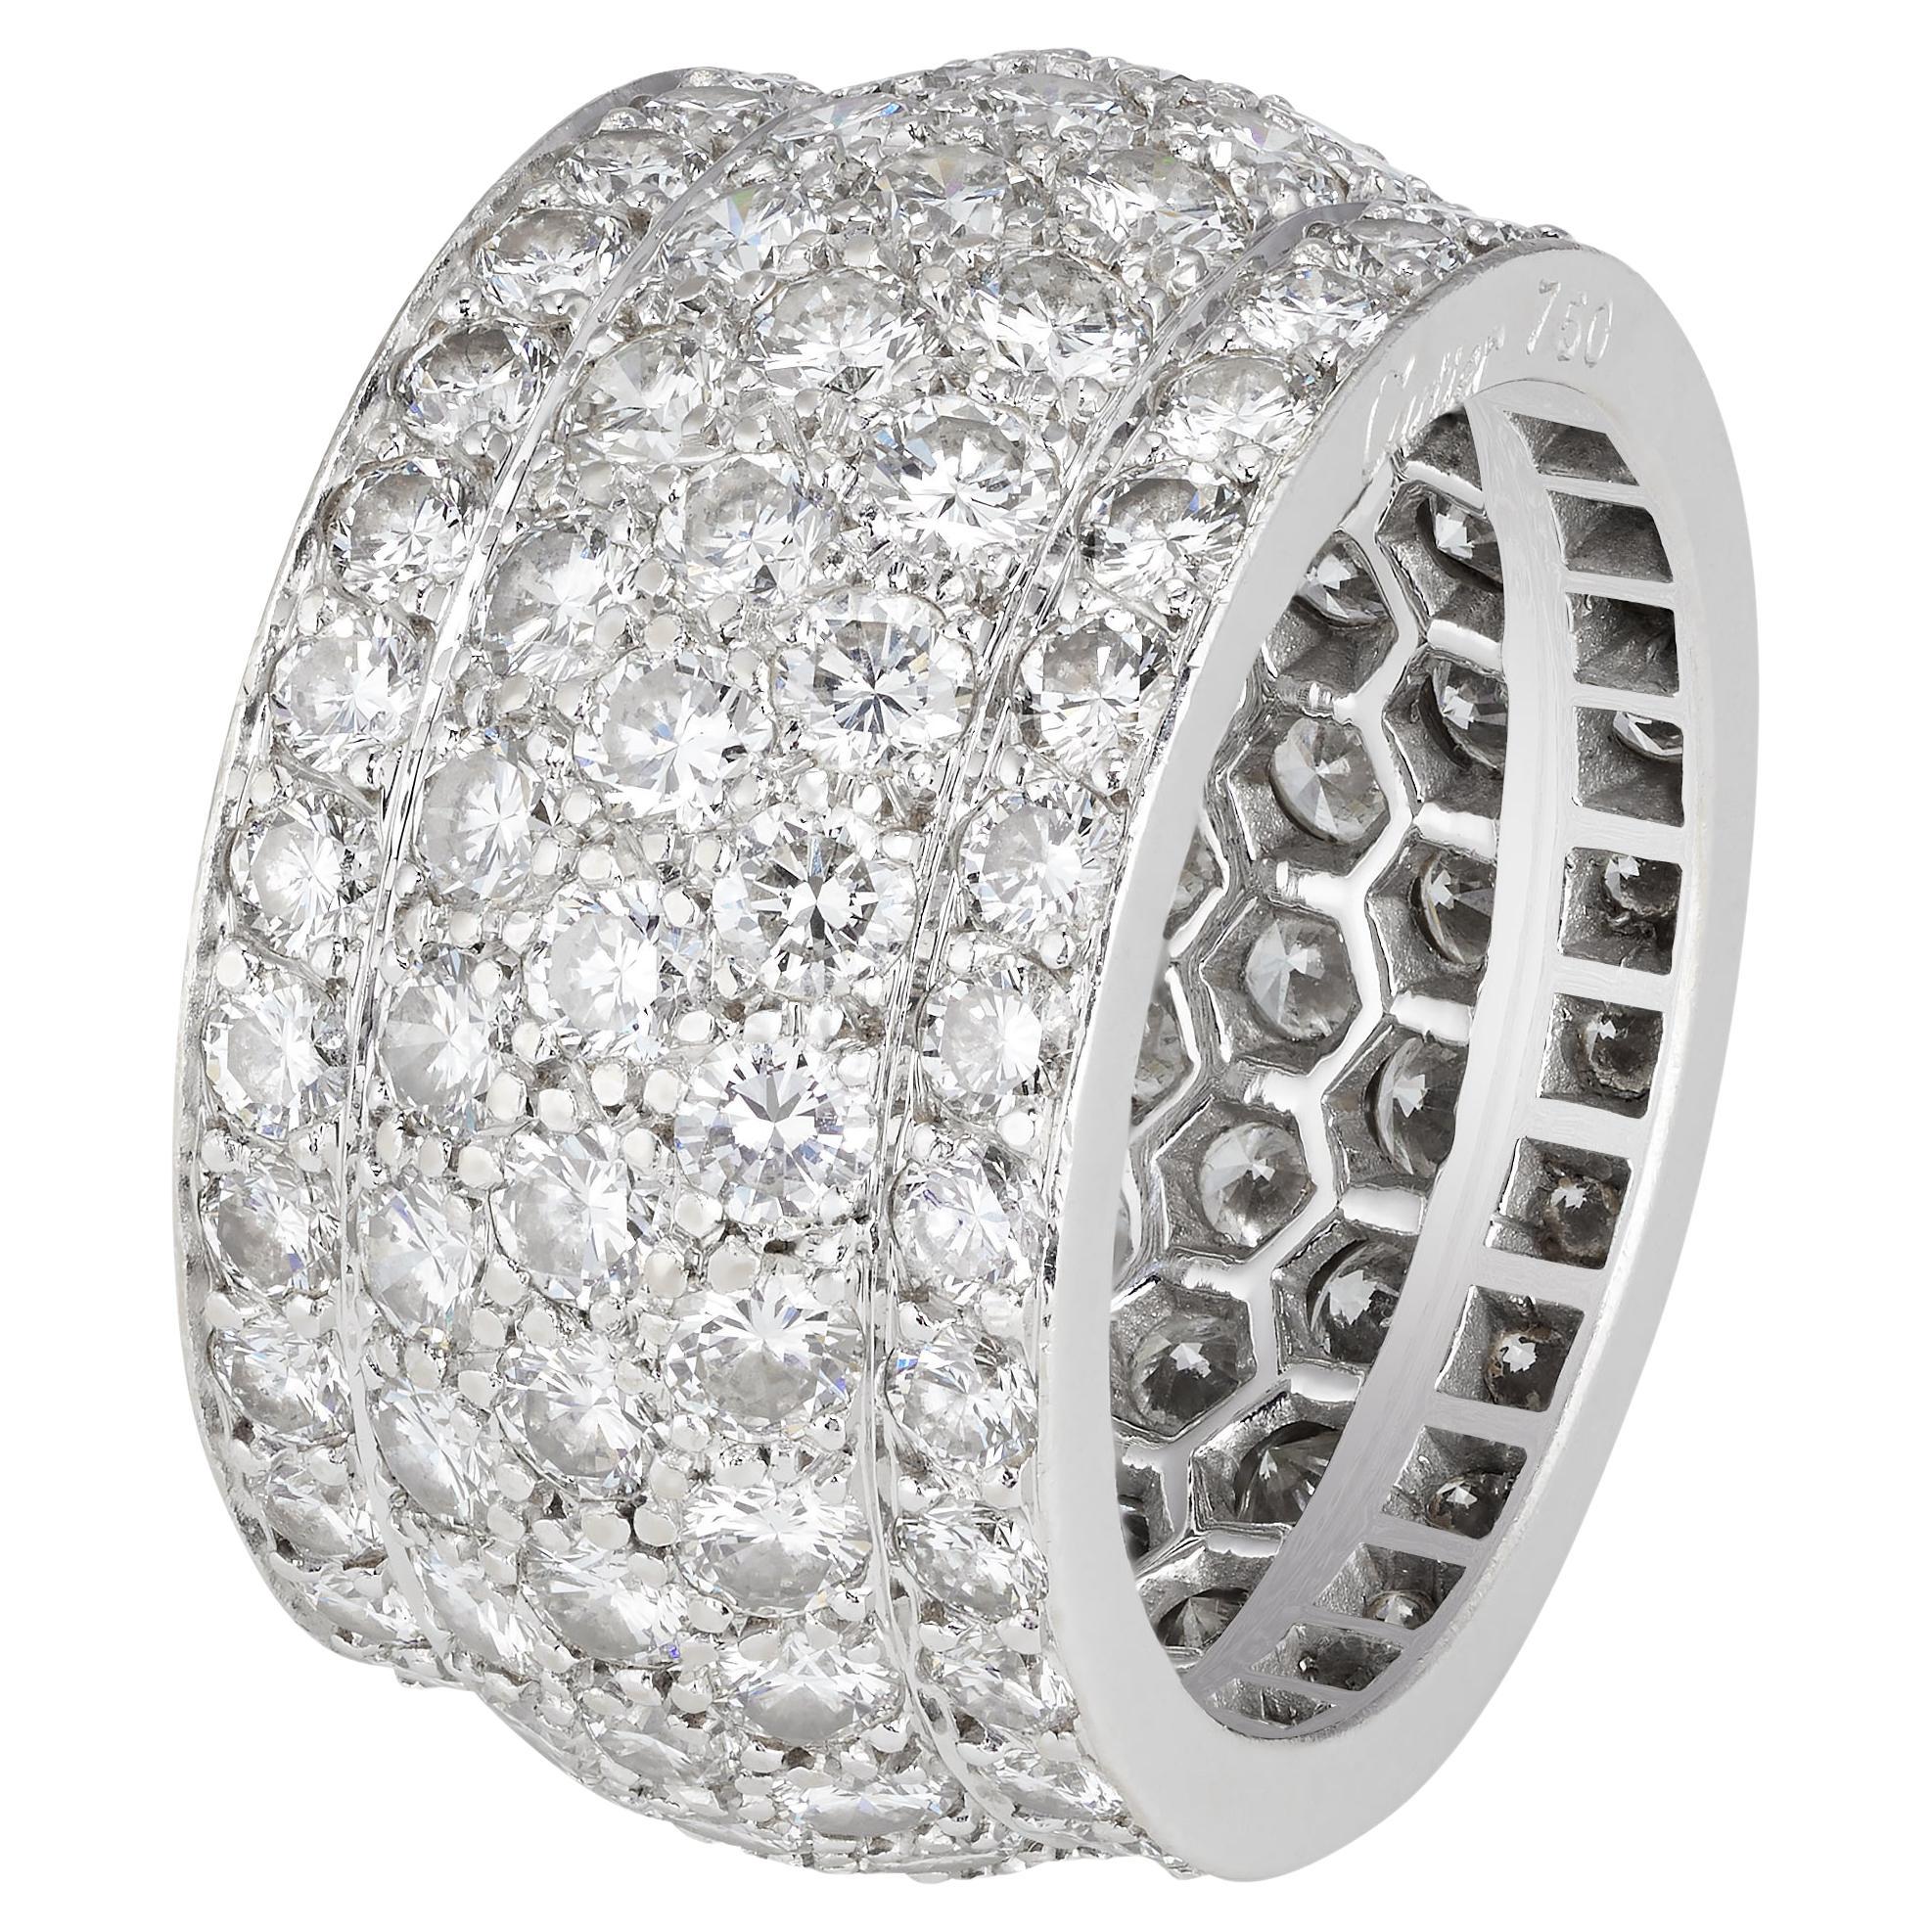 Cartier Diamond ‘Nigeria’ Eternity Wide Band Ring in 18K White Gold